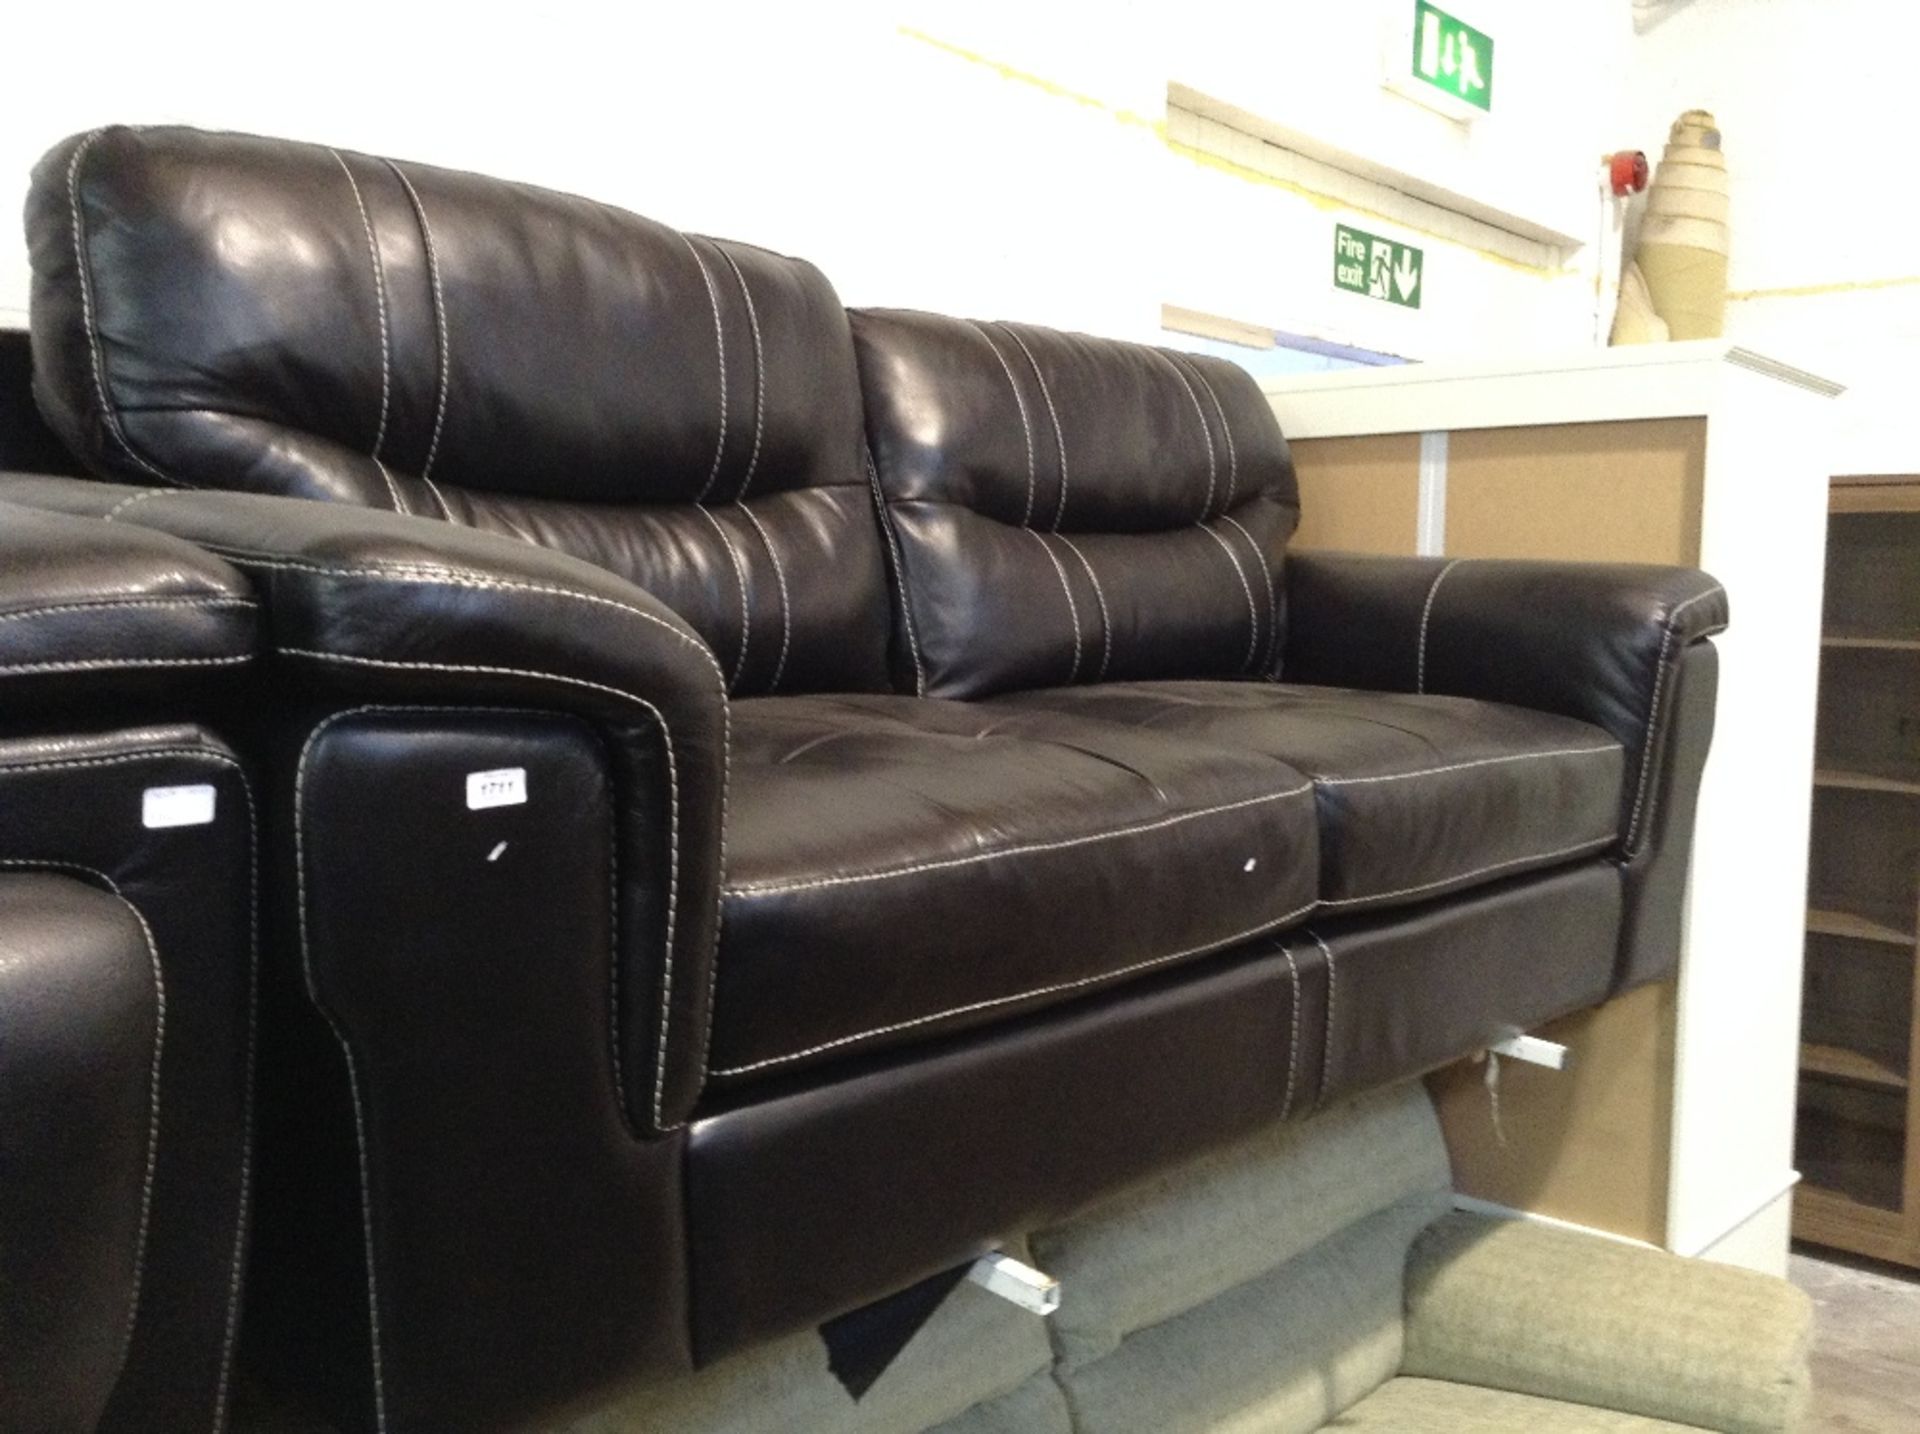 BLACK LEATHER WITH WHITE STITCH 3 SEATER SOFA (scuffed on the front)